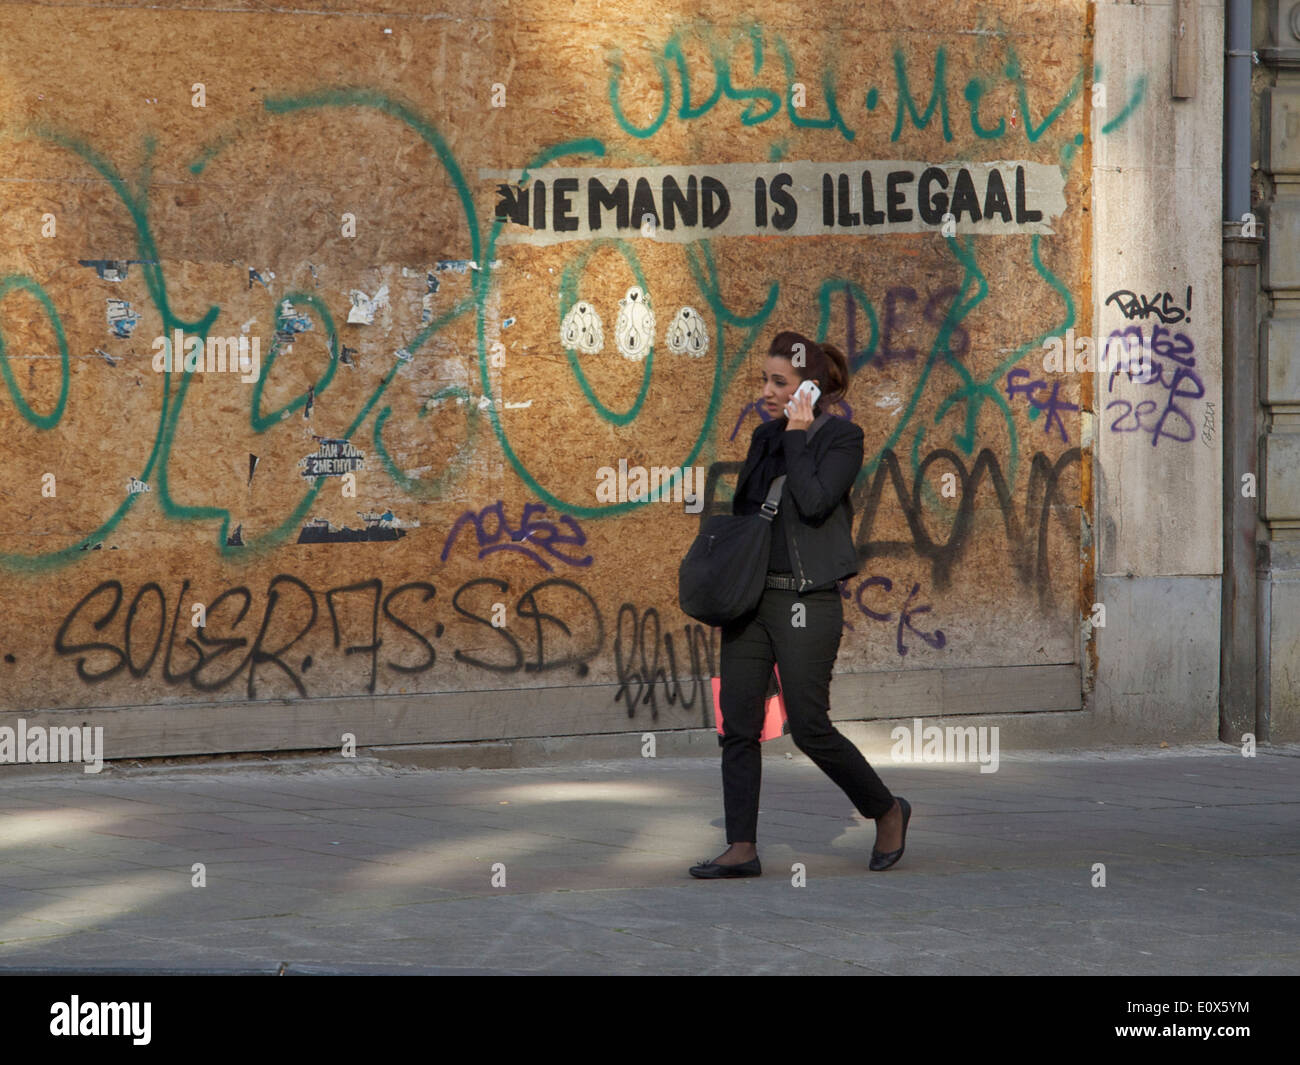 Woman talking on mobile phone with graffiti saying nobody is illegal in Dutch language, Brussels, Belgium Stock Photo